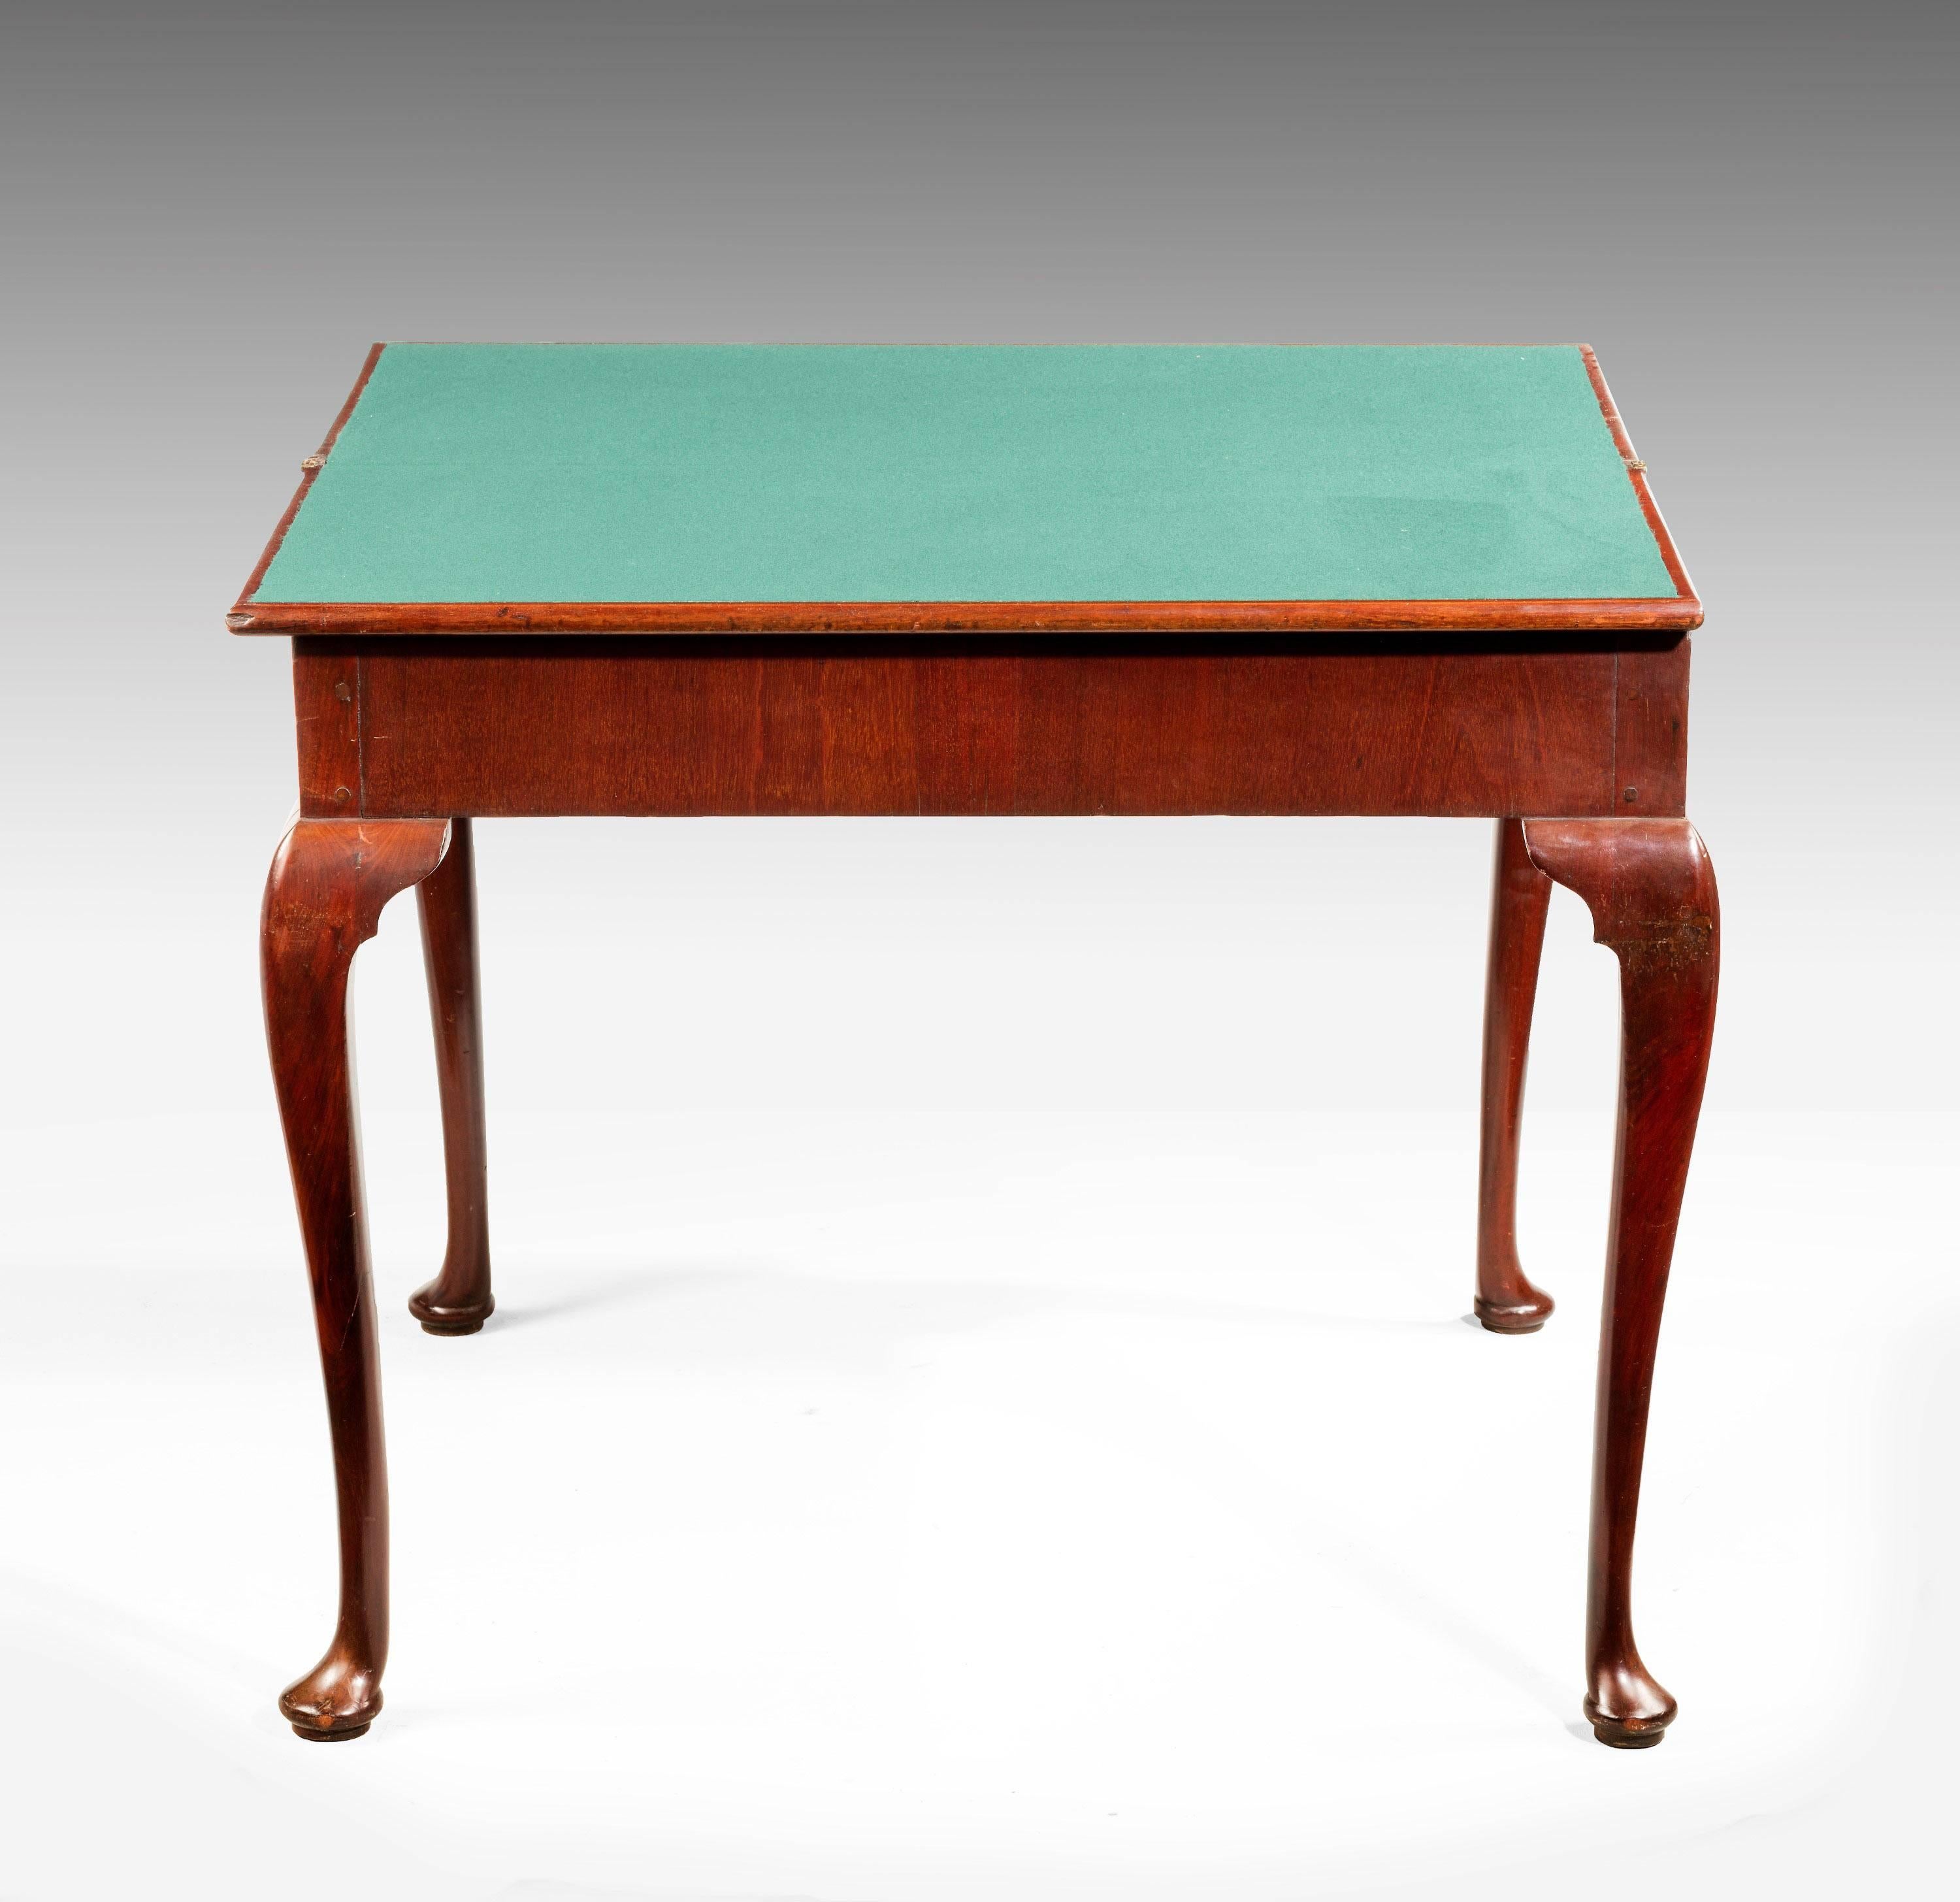 A Chippendale period mahogany card table with finely carved knees to the cabriole supports ending in a flattened bun foot. Very good figuring overall.

RR.